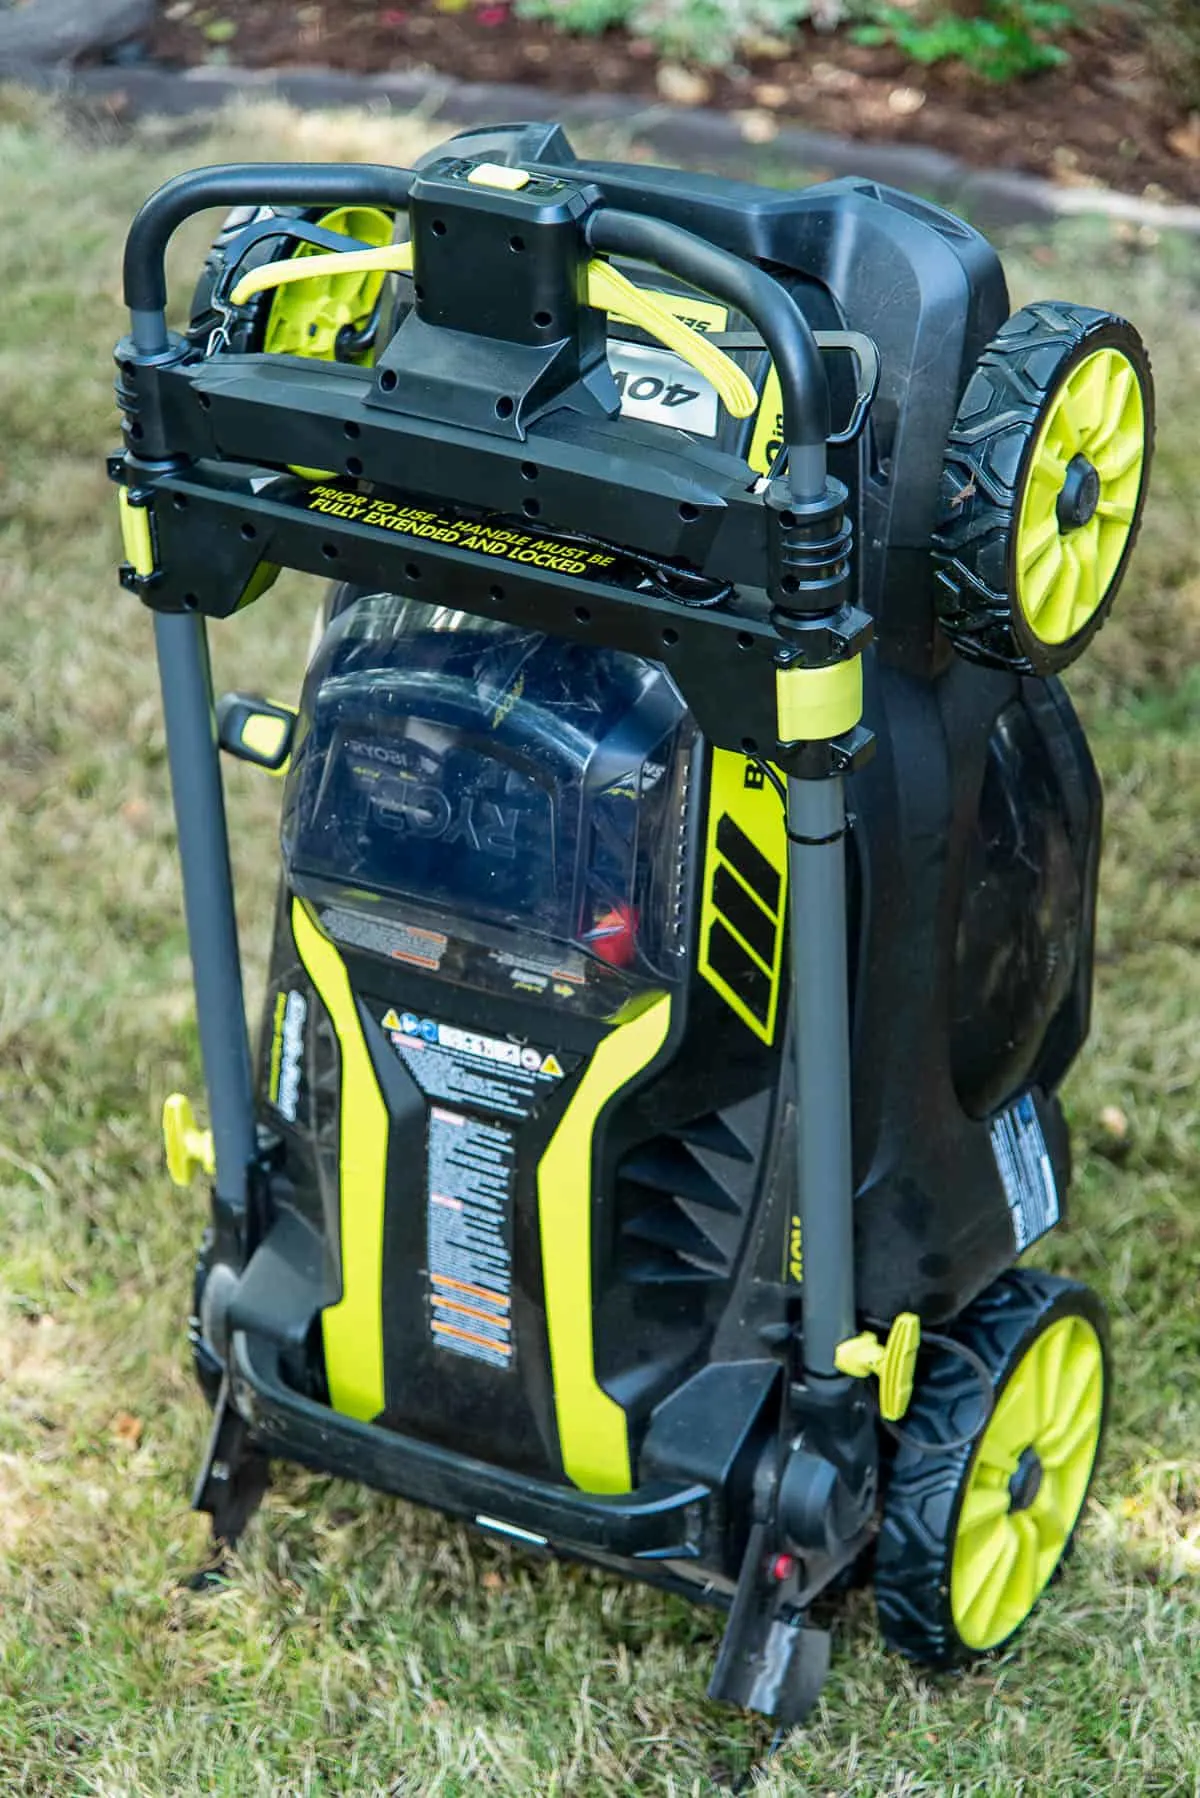 ryobi self propelled electric lawn mower folded up and ready for storage